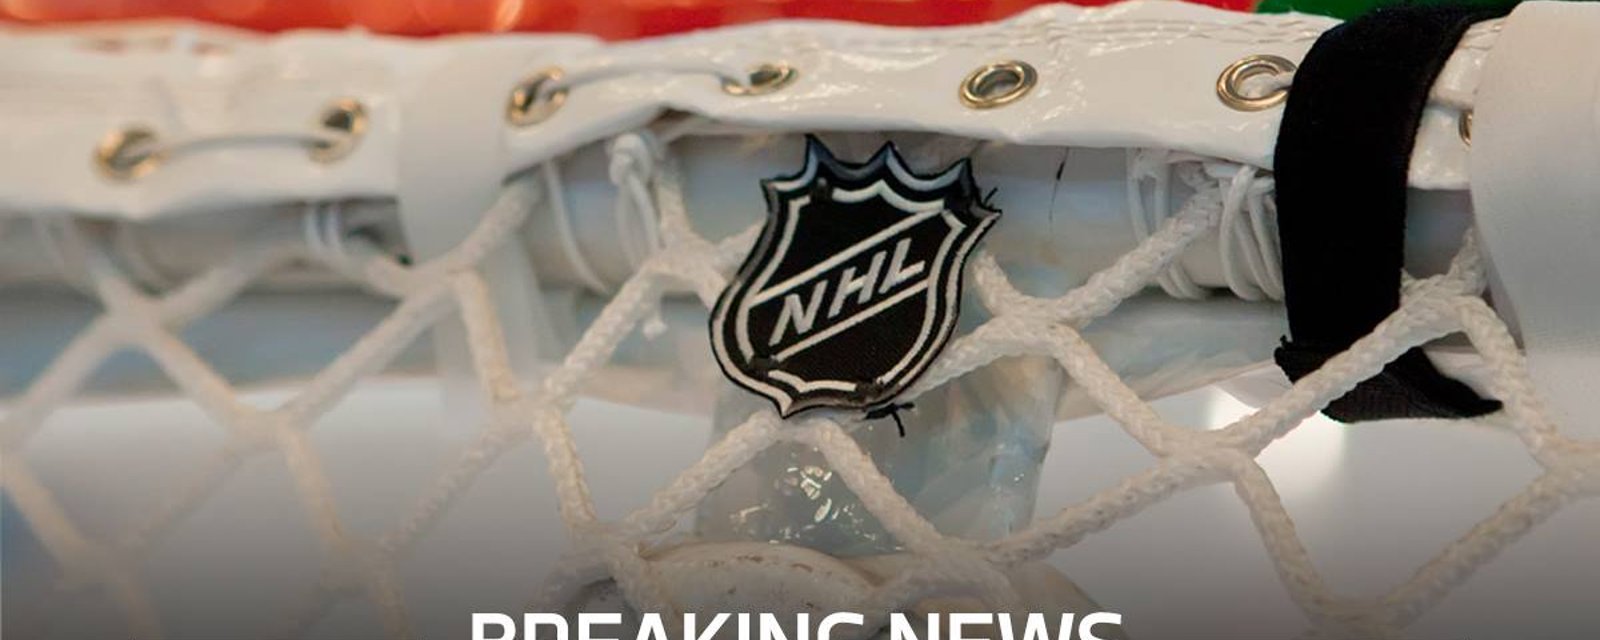 NBC informs NHL it’s planning to shut down its NBC Sports Network channel by the end of 2021 